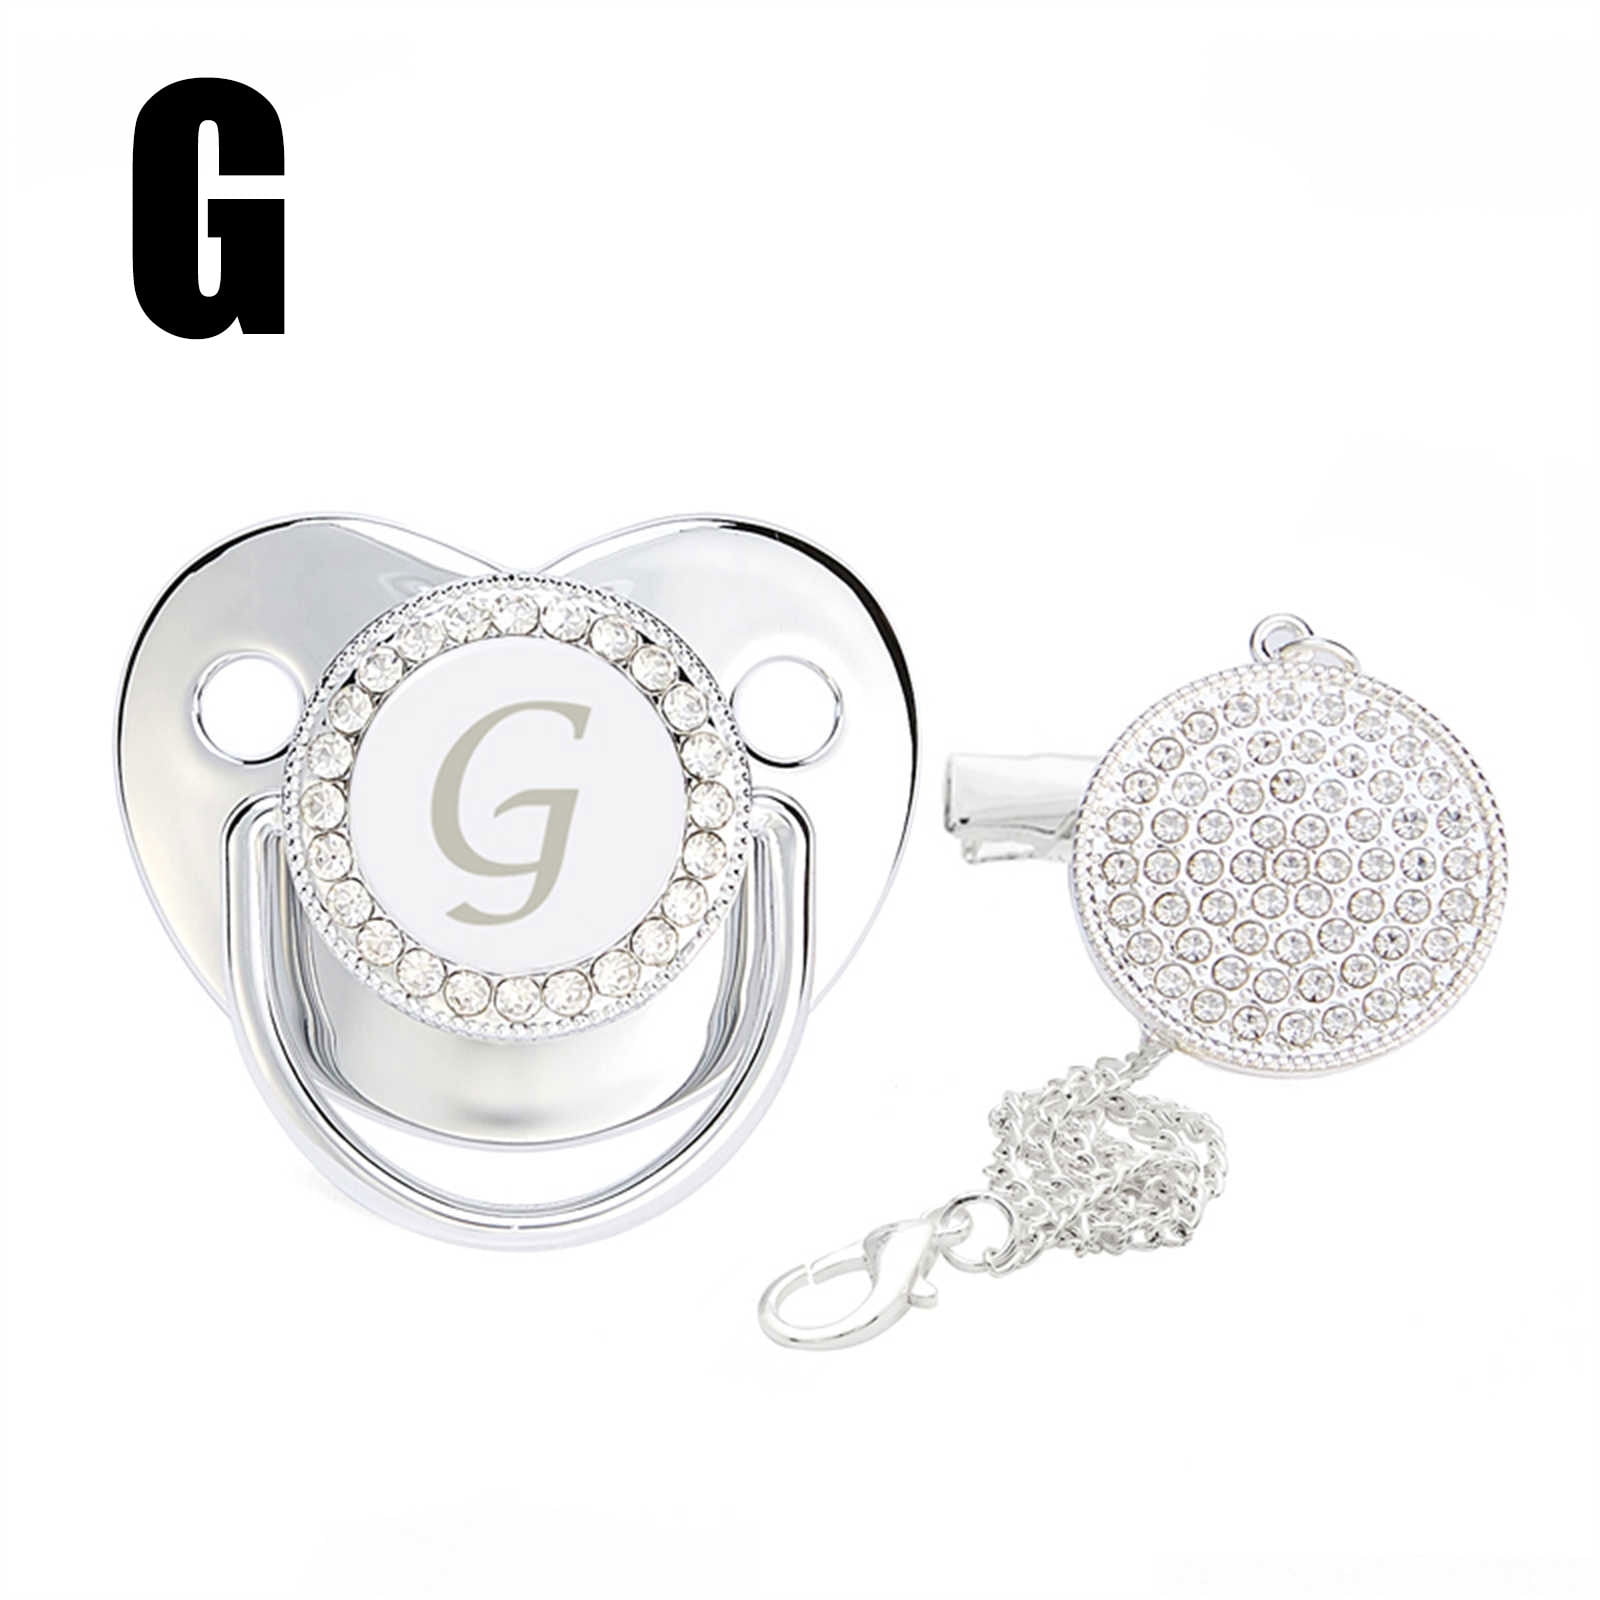 BABY GIRL/BOY SILVER CROWN BLING PERSONALISED DUMMY SAVER HOLDER CLIP 